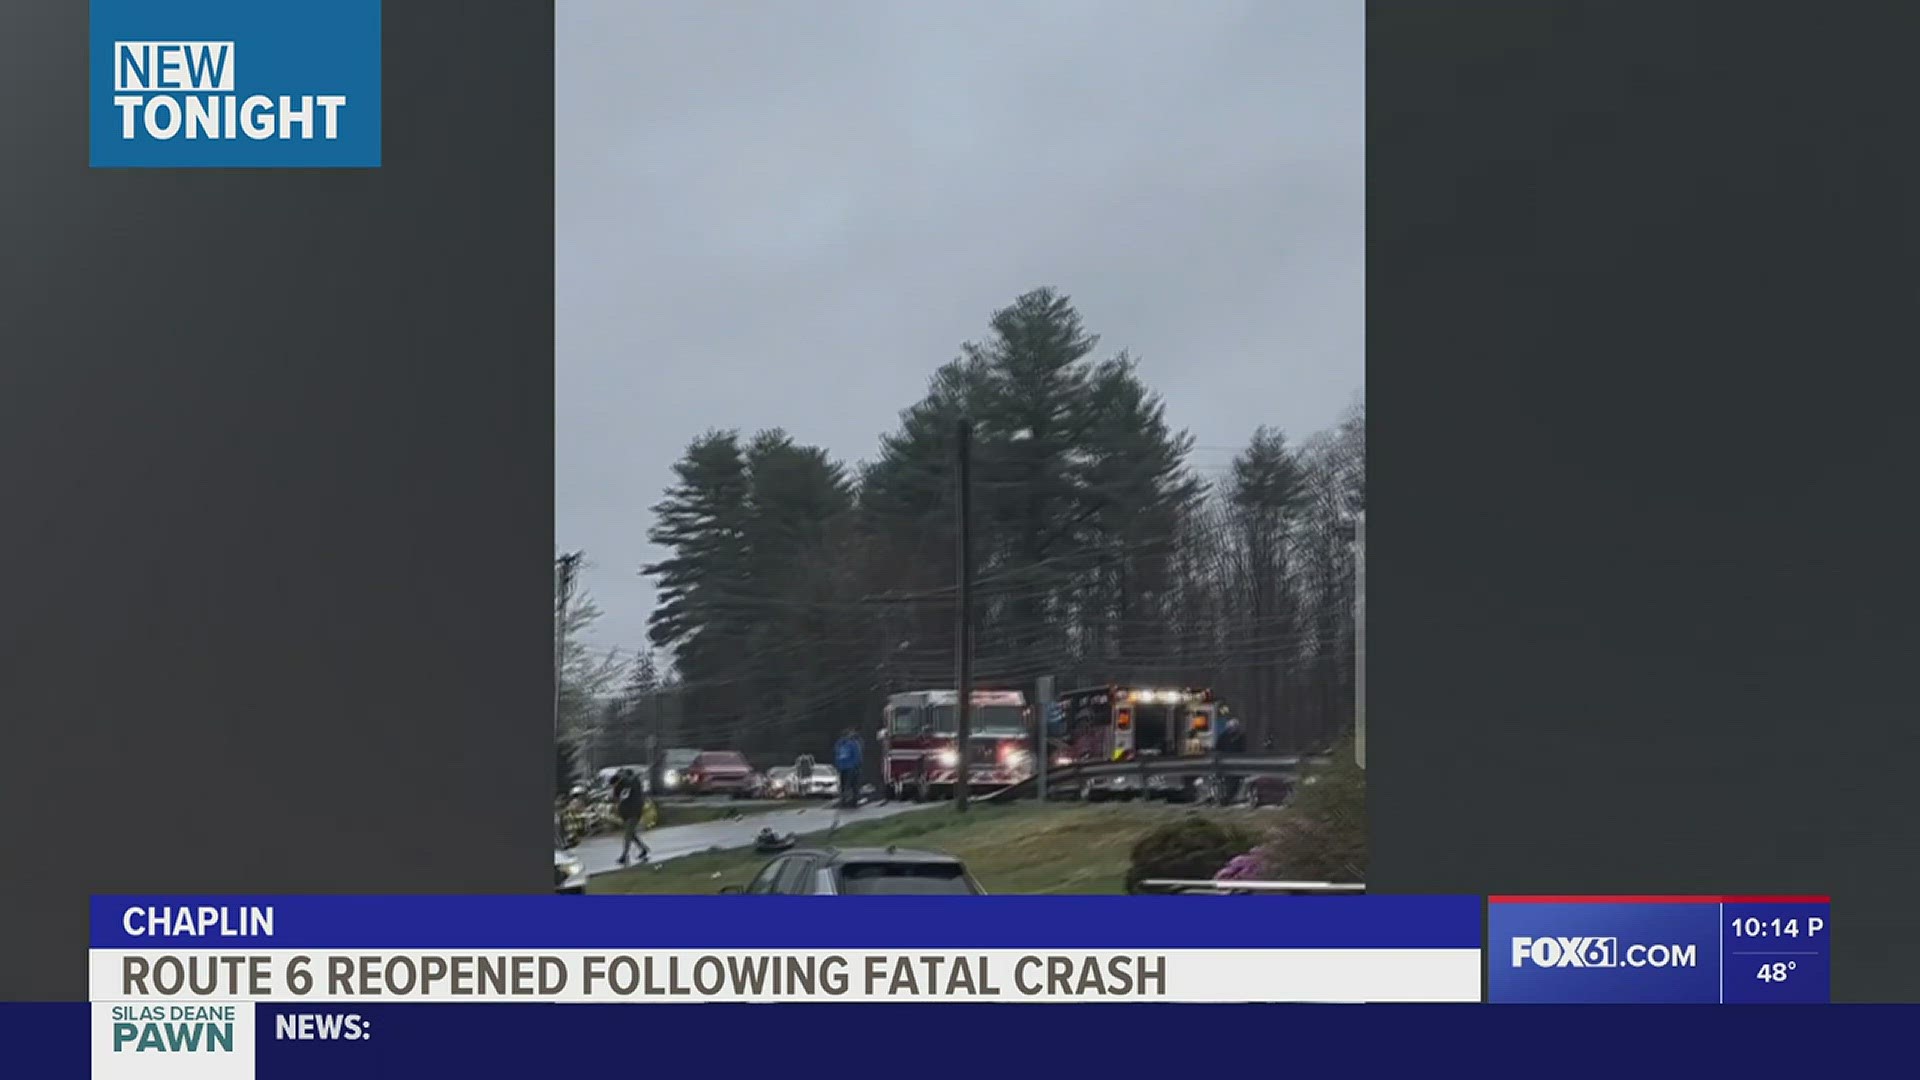 Connecticut State Police Troop D responded to a crash on Willimantic Road in Chaplin, and a fatality was reported.